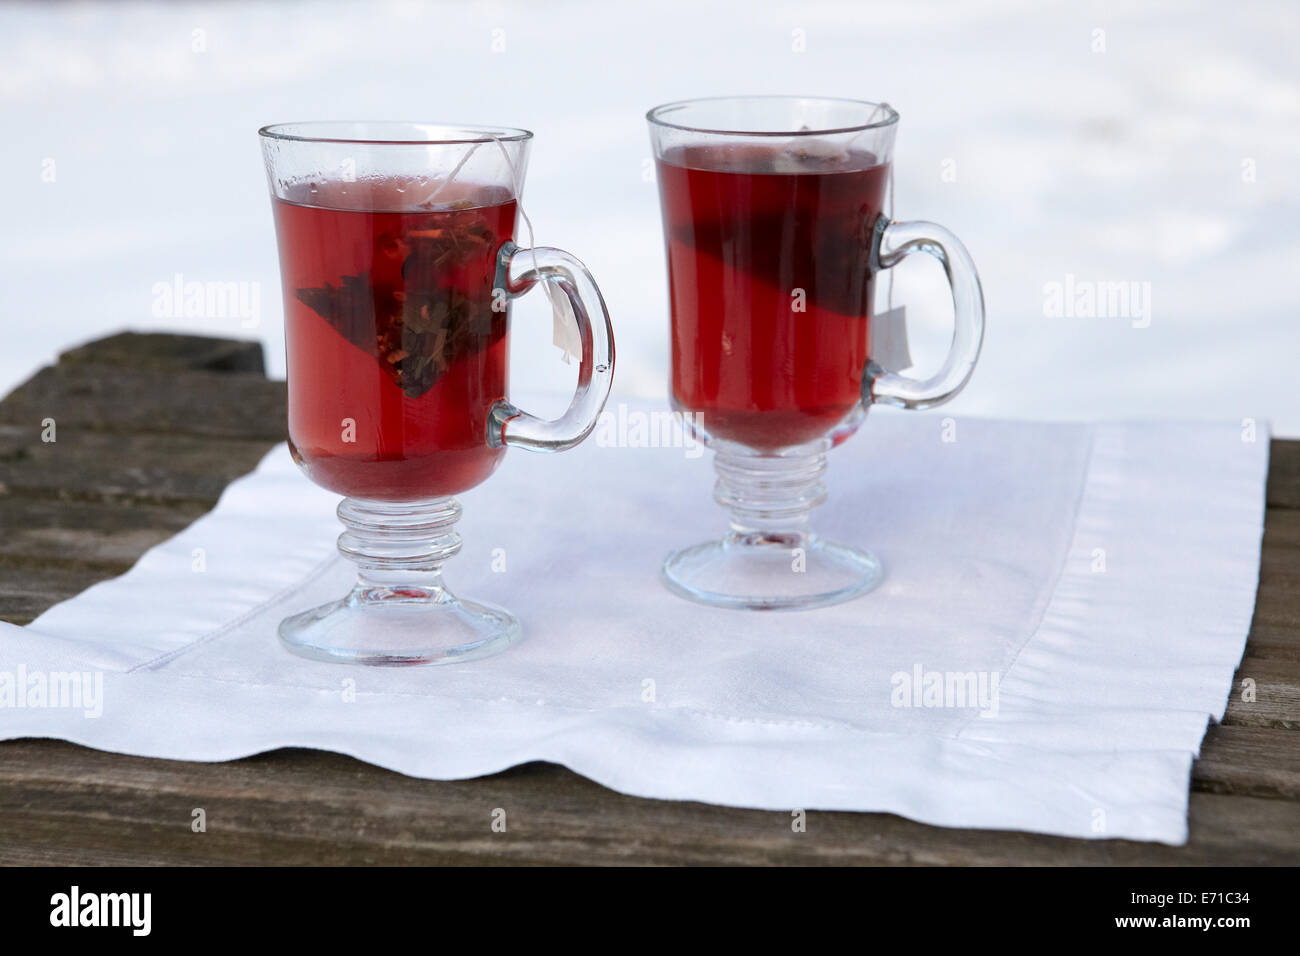 Hot herb tea in outdoor snowy winter setting Stock Photo